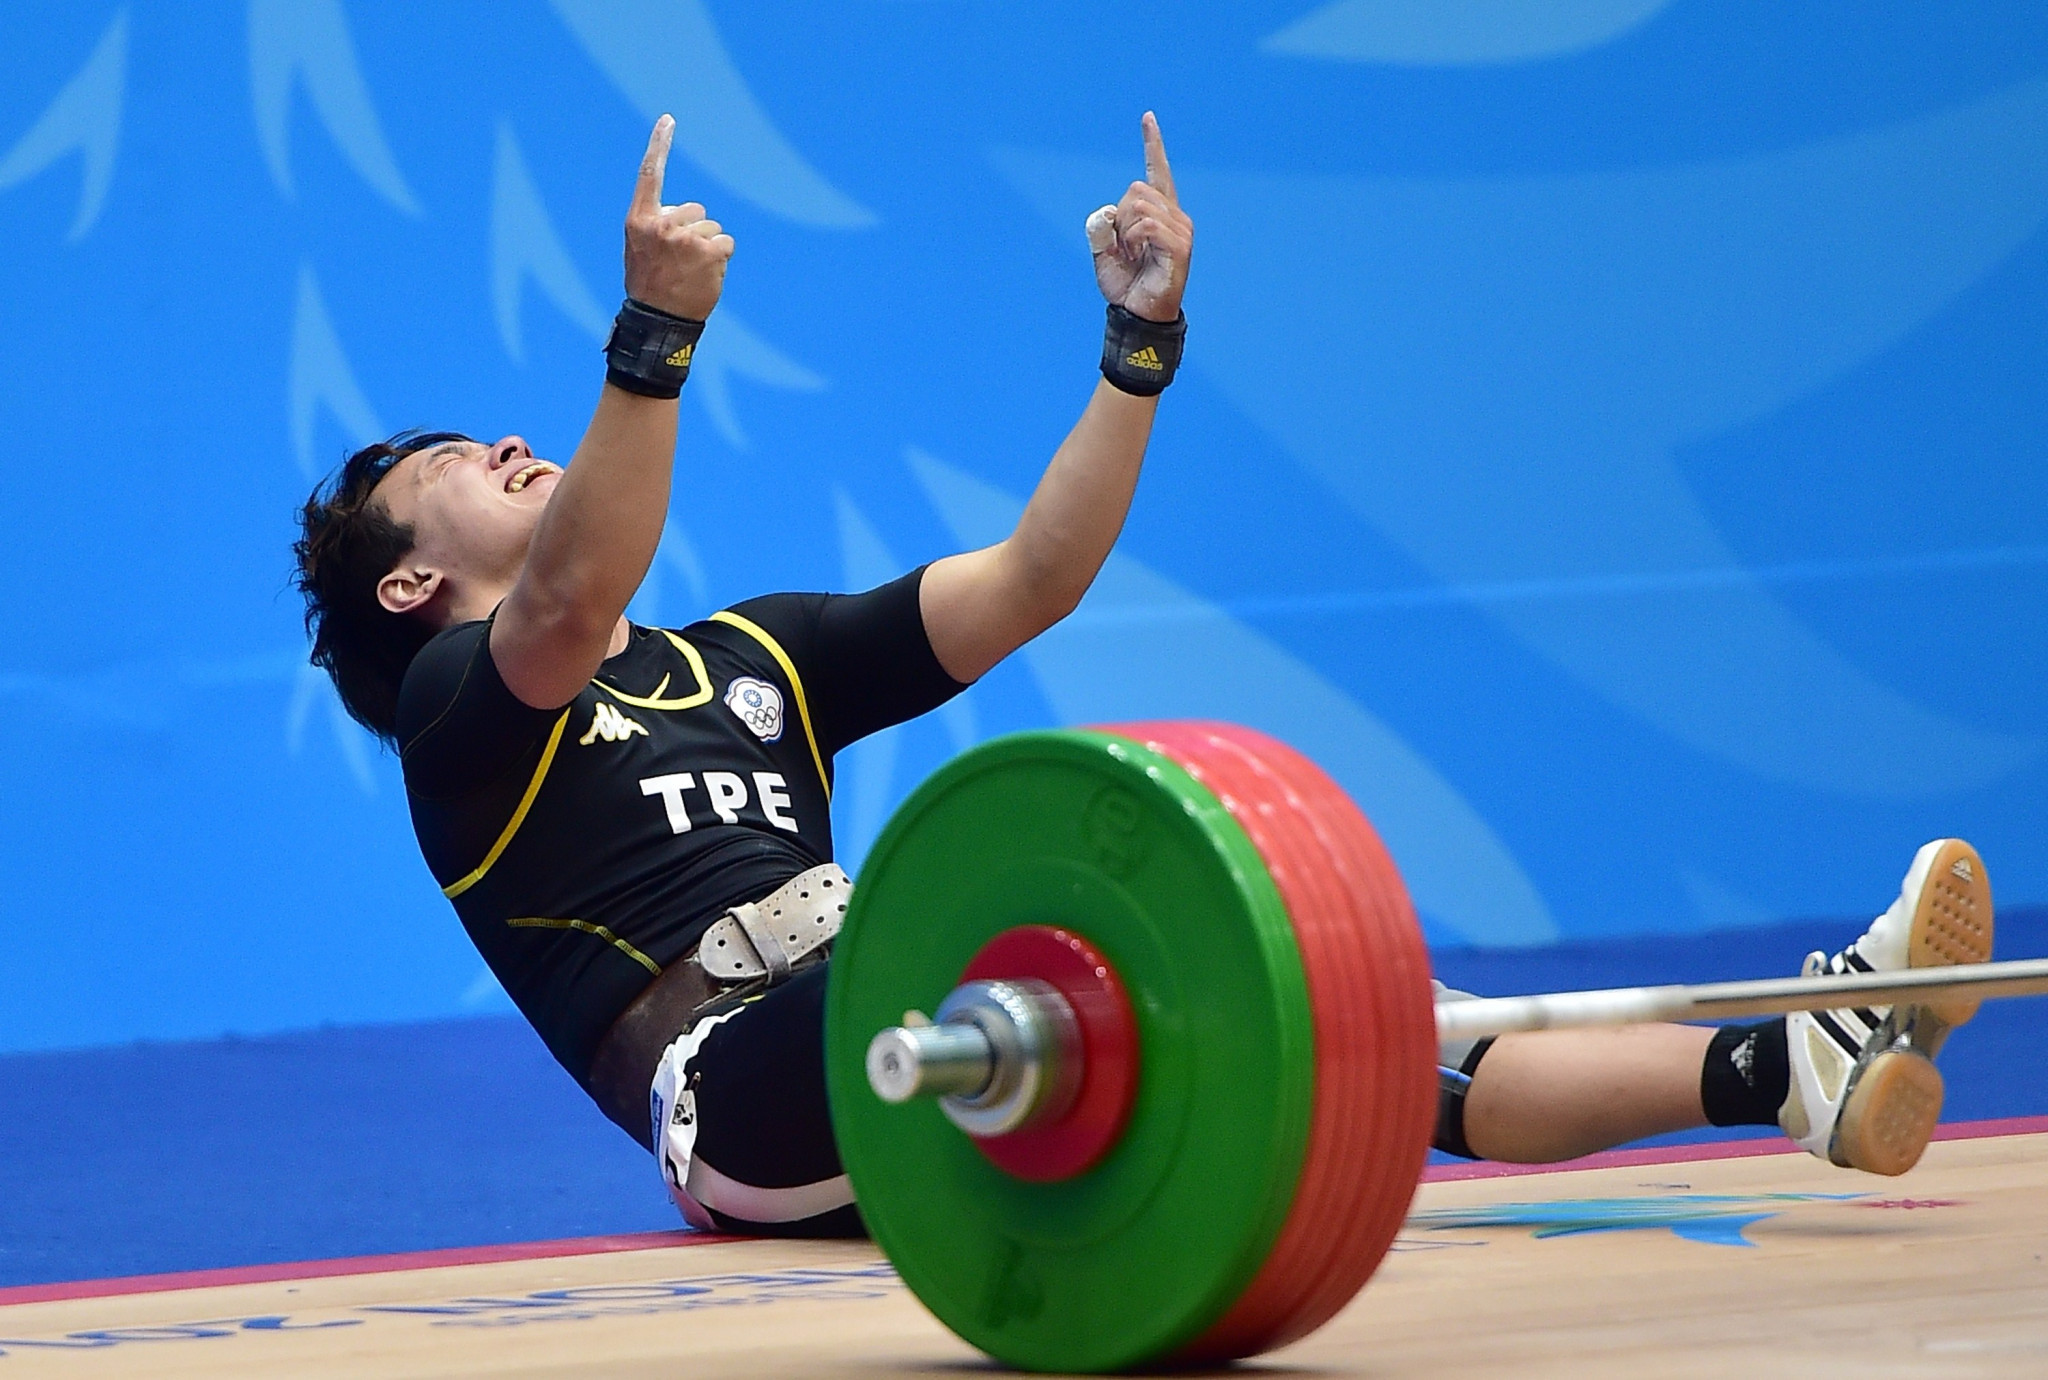 Former weightlifting world record holder Lin banned for eight years by CAS after WADA win appeal